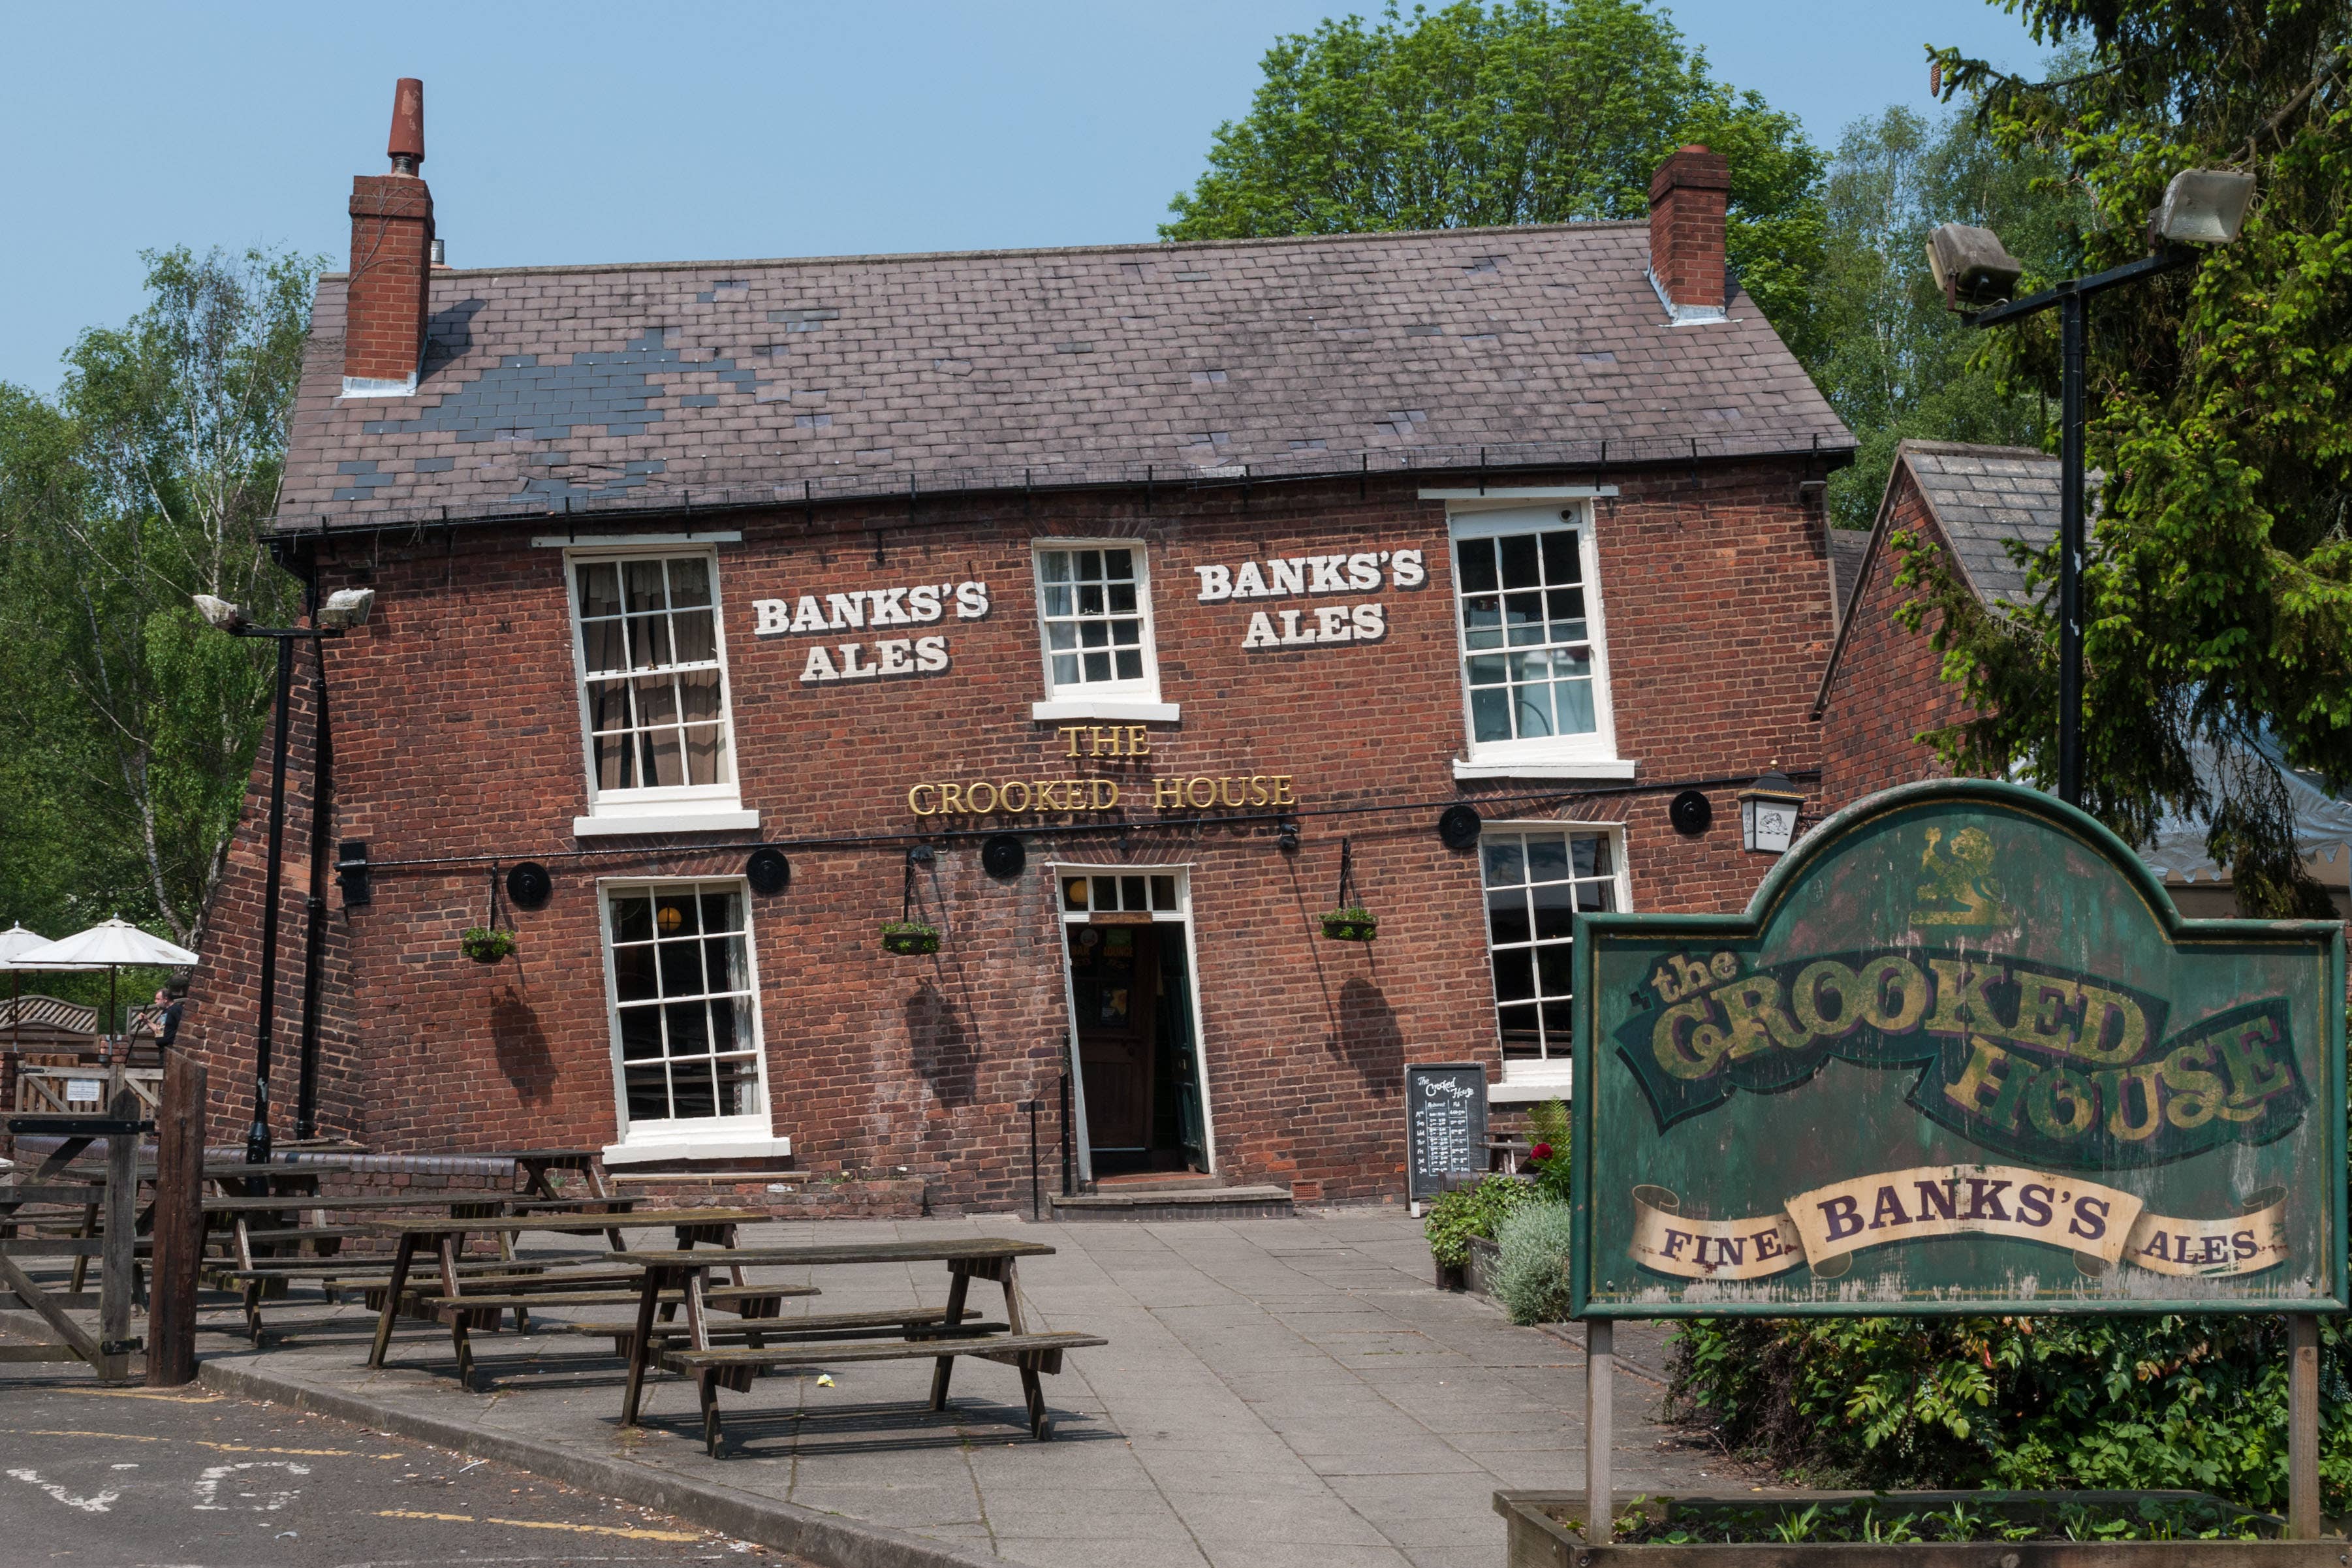 The Crooked House is known as Britain’s ‘wonkiest pub’